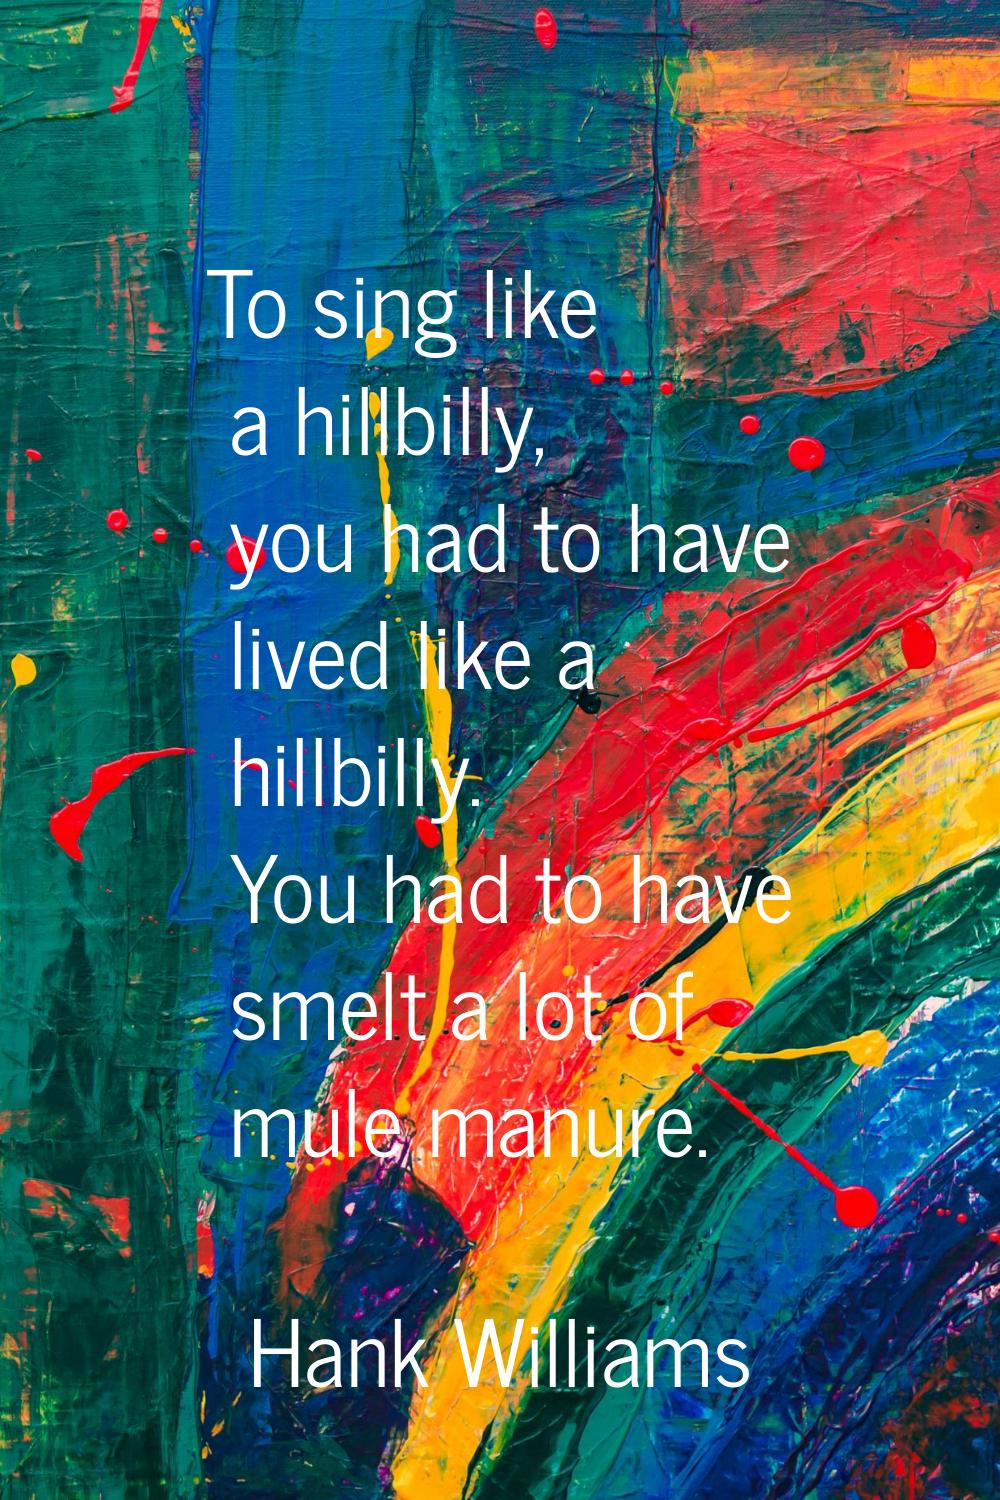 To sing like a hillbilly, you had to have lived like a hillbilly. You had to have smelt a lot of mu